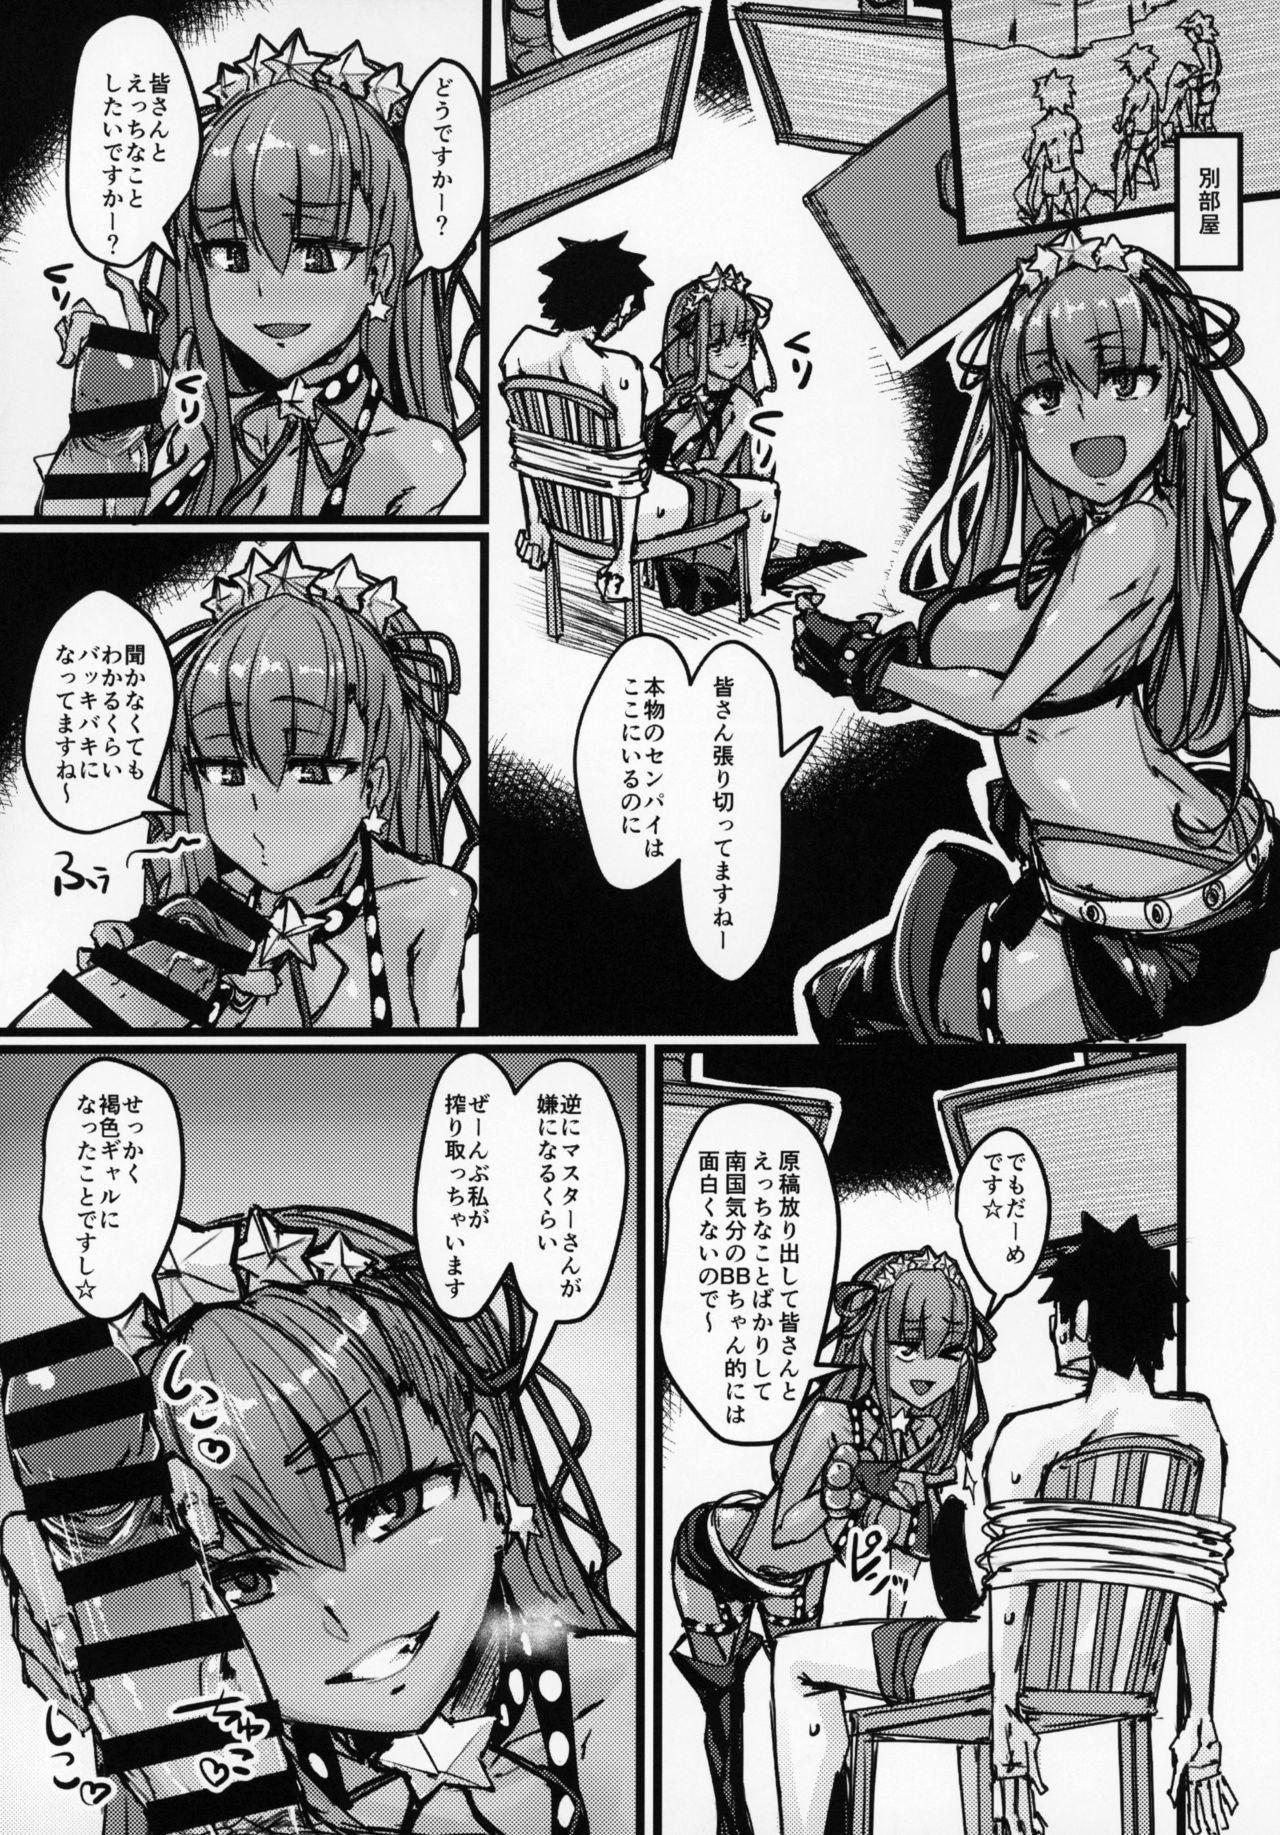 Anale AssAssIN+M - Fate grand order Maid - Page 10